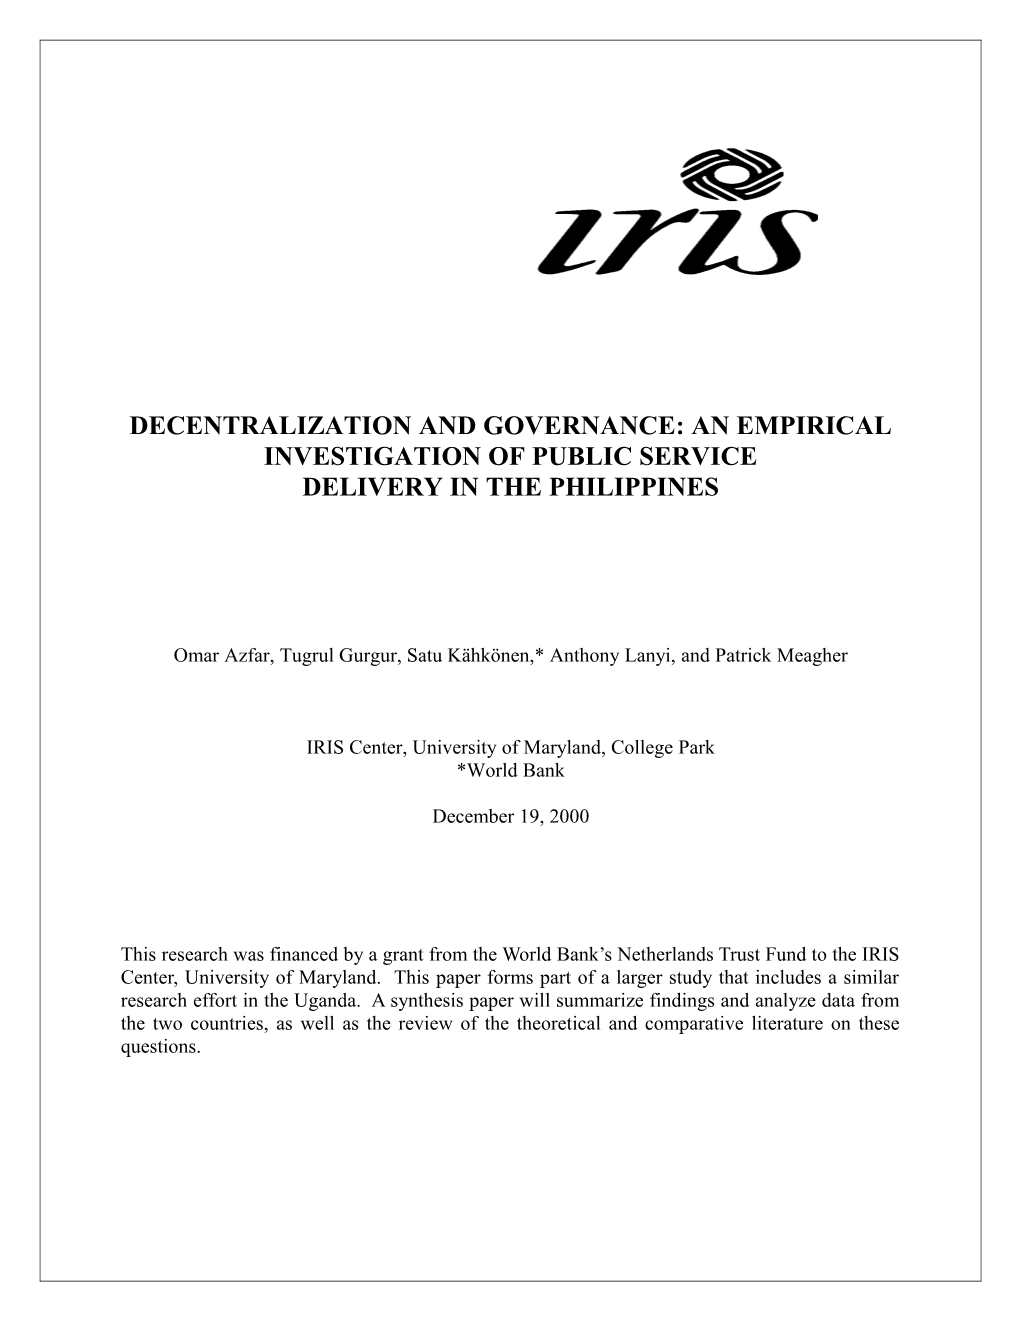 Decentralization and Governance: an Empirical Investigation of Public Service